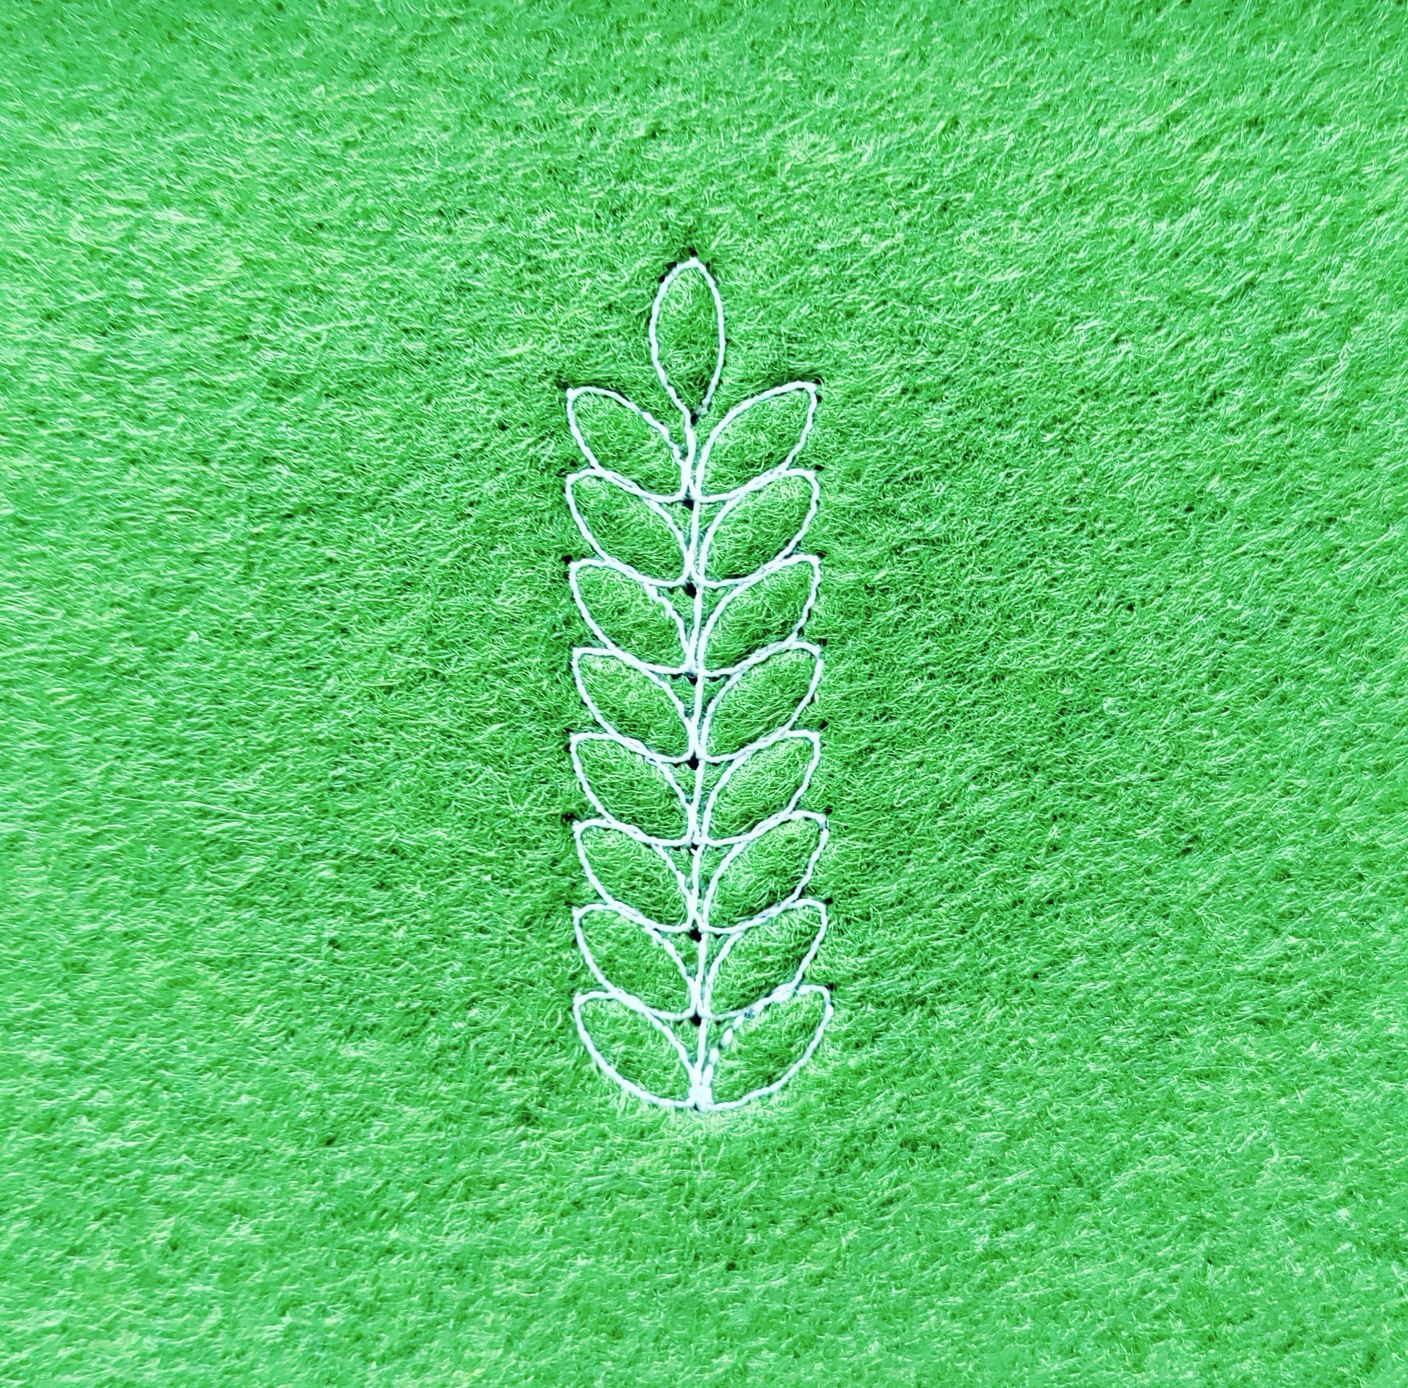 A representation of a stalk of wheat, stitched in white thread on a green felt background.